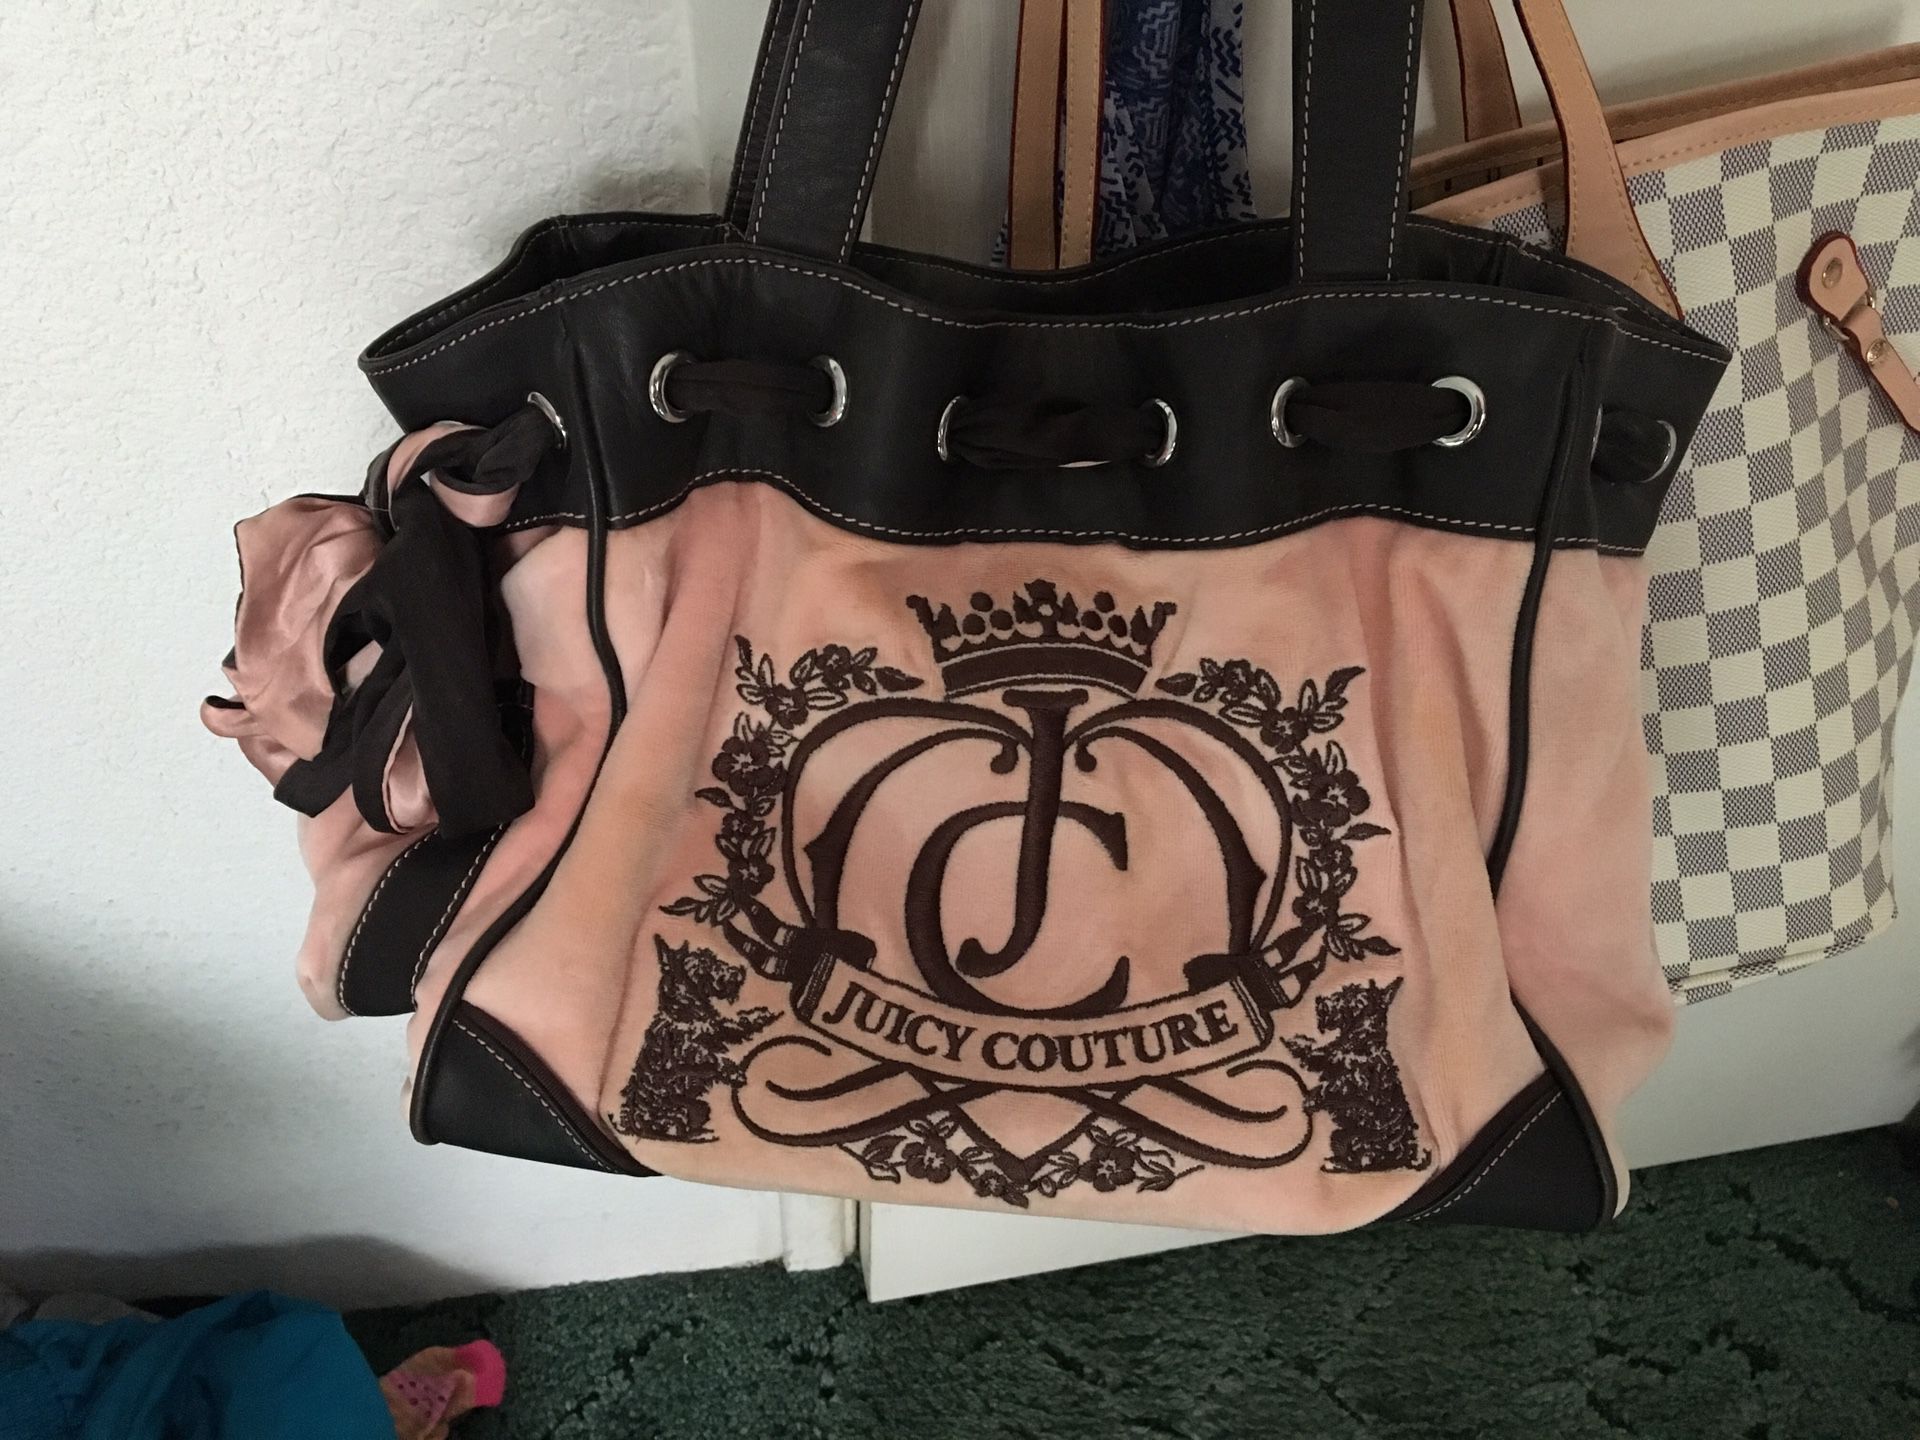 Authentic juicy couture bag